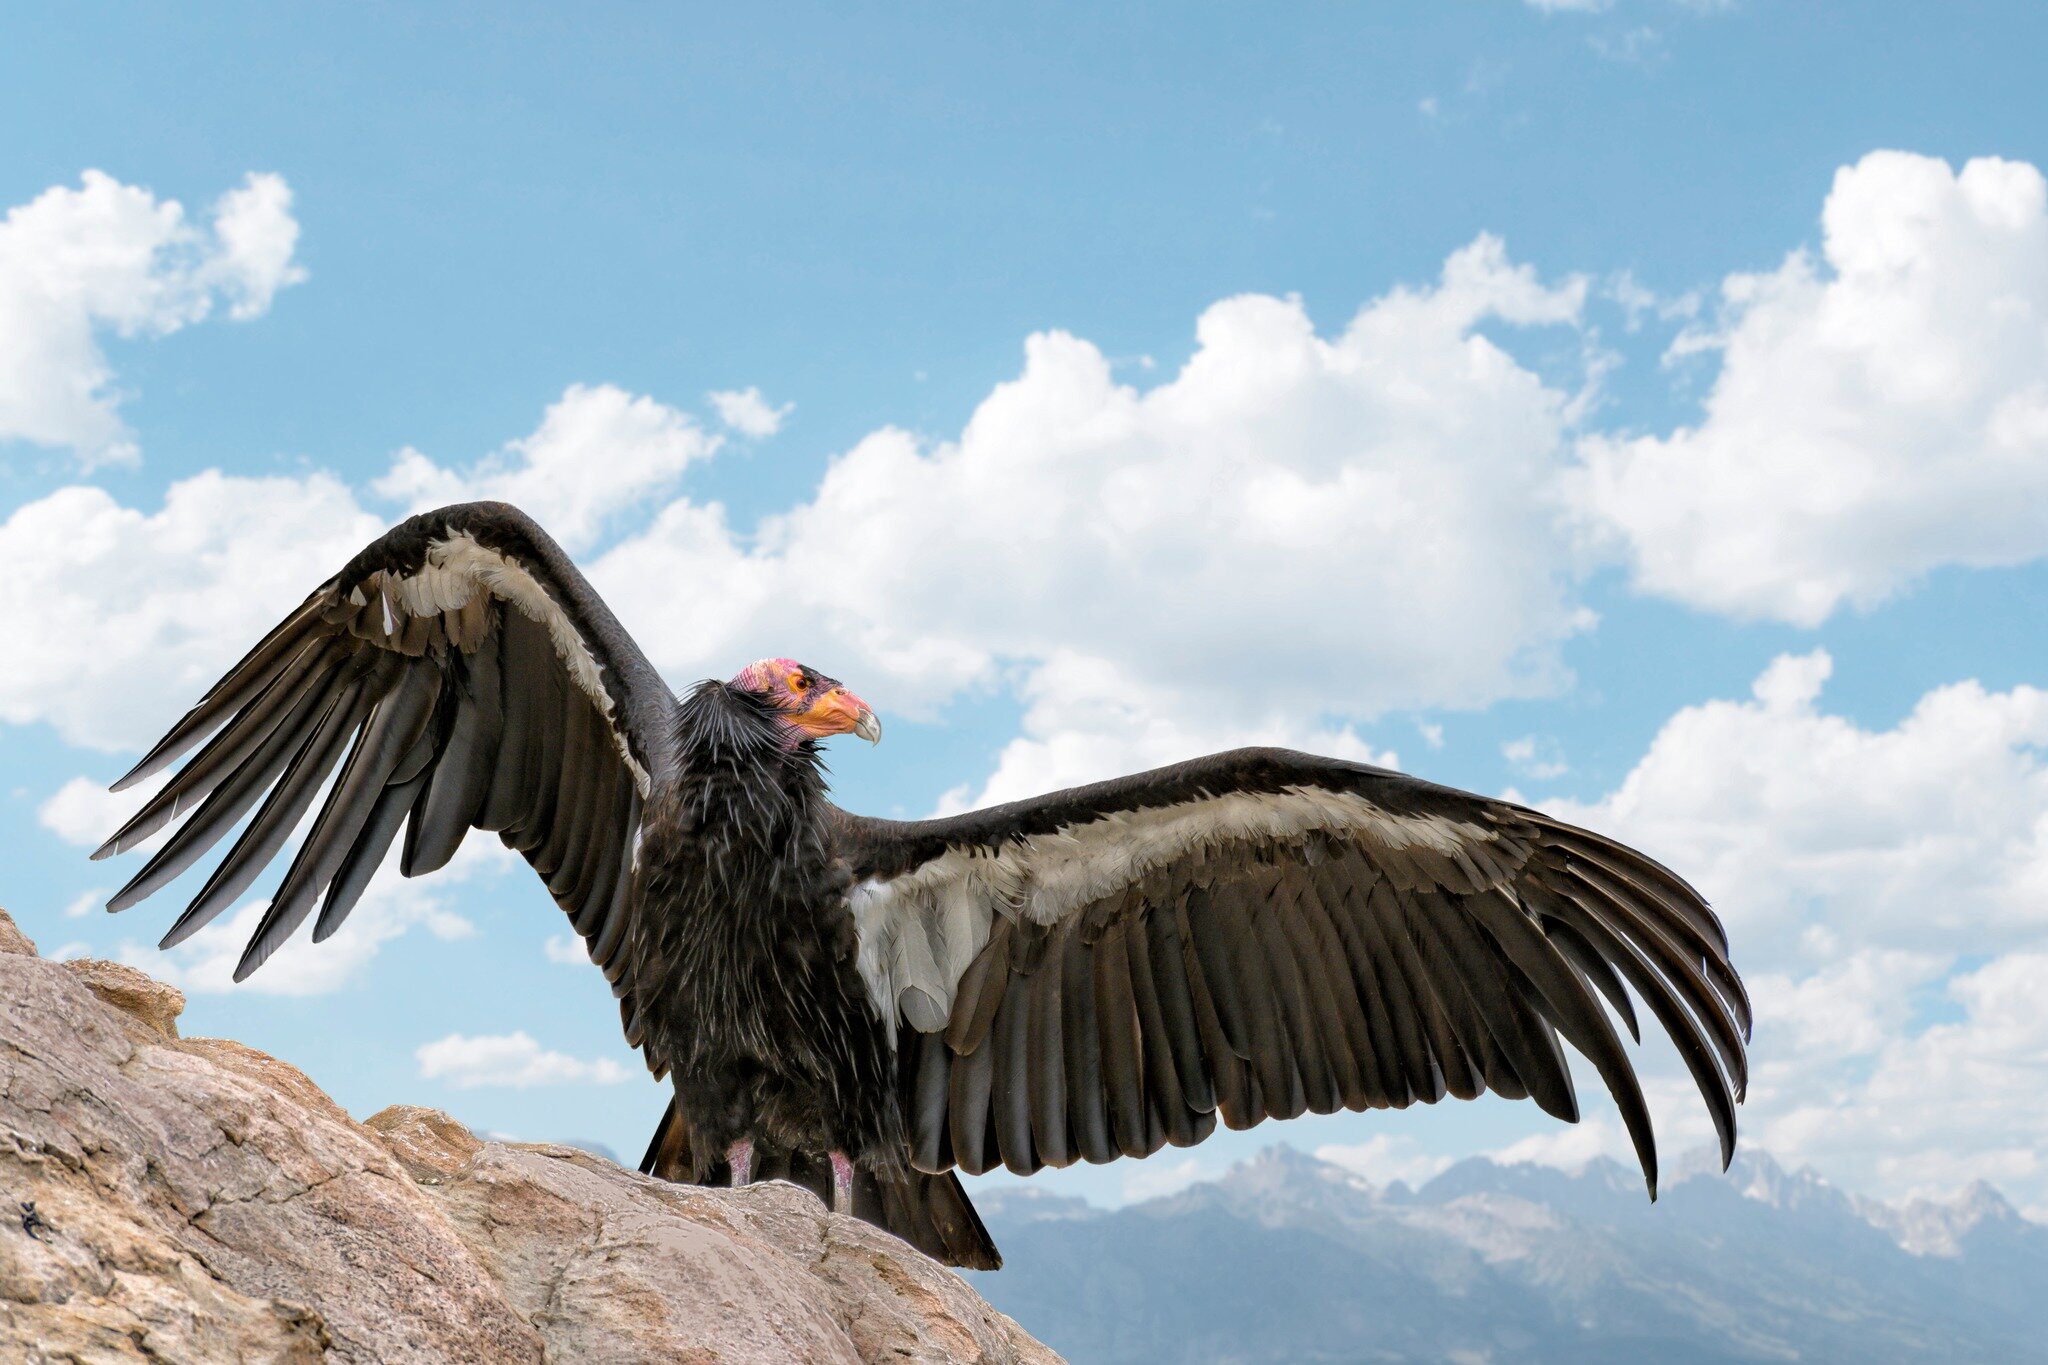 Today is National Endangered Species Day, so we wanted to do an appreciation post for a California native that has been clawing its way back from the brink of extinction for decades. We are talking about the California Condor, which is still listed a